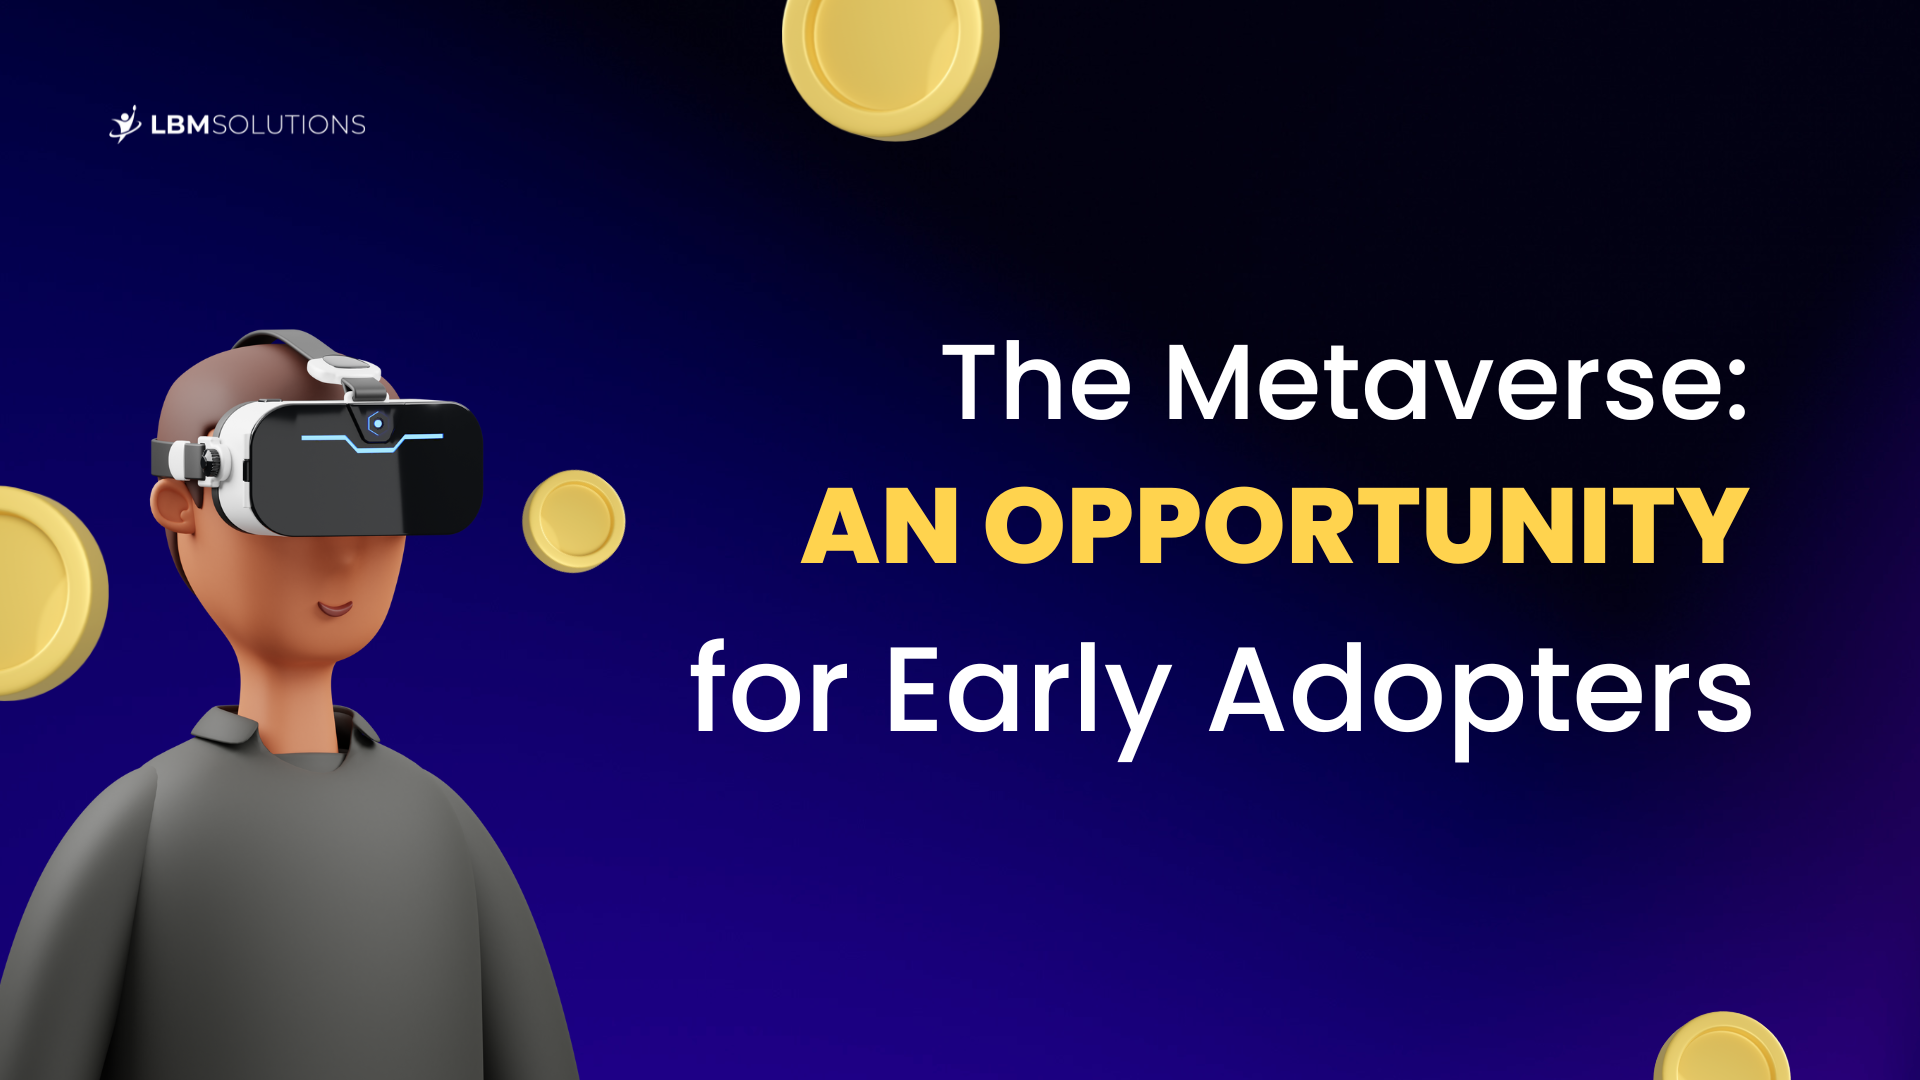 The Metaverse: An Opportunity for Early Adopters